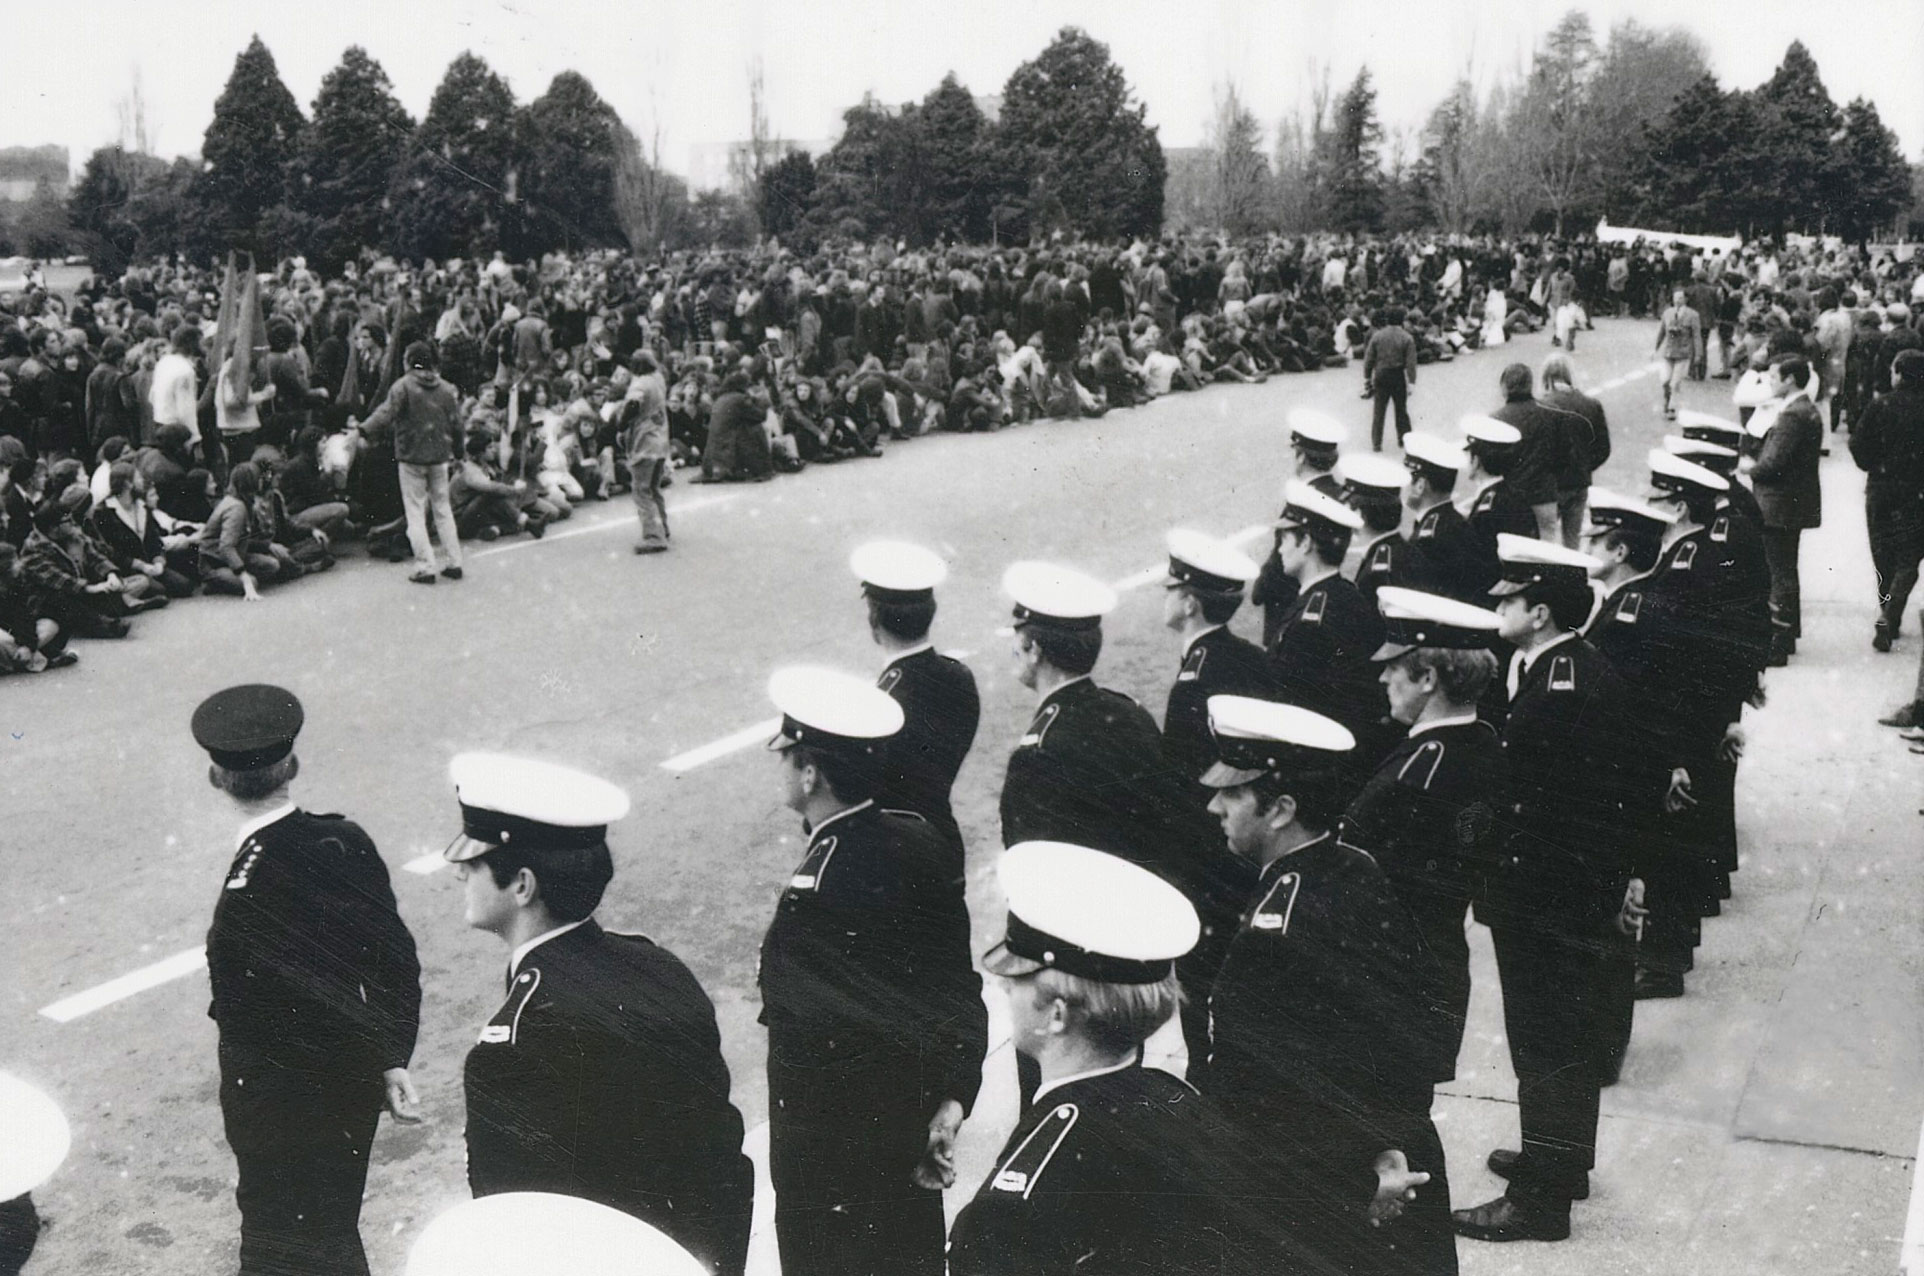 View from Parliament House of police and protesters at a land rights demonstration, Canberra, 30 July 1972.